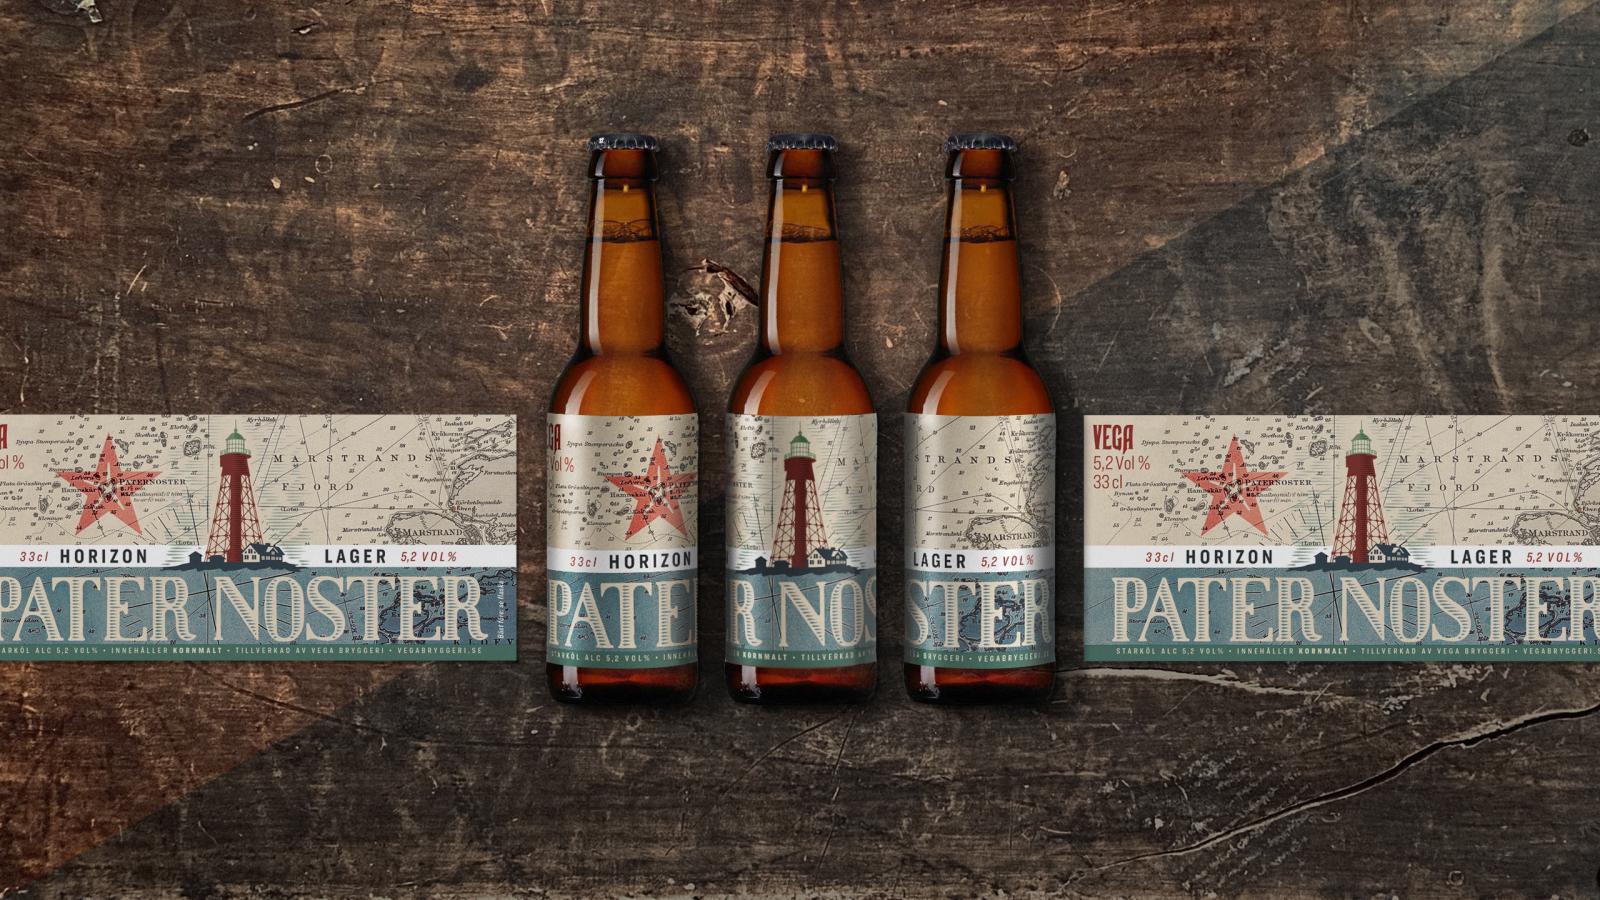 Pater Noster beer